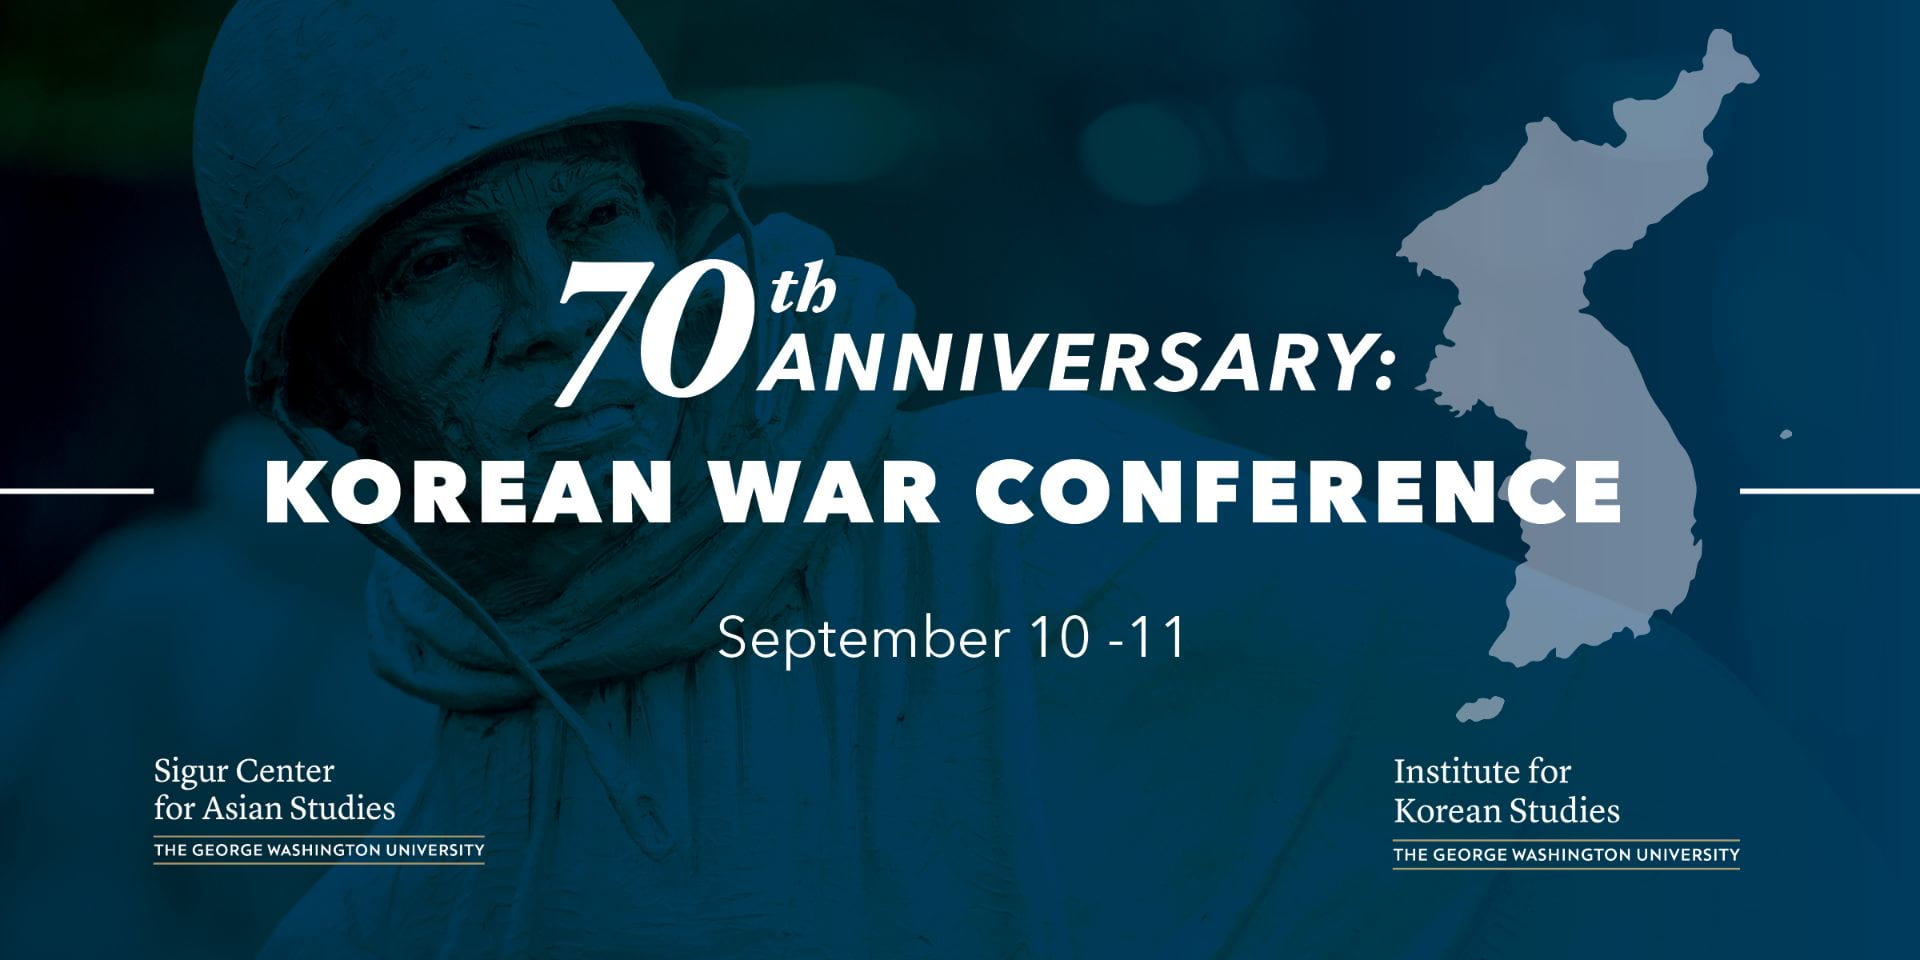 event flyer with blue overlay over images of a Korean War soldier's statue and the Korean Peningsula; text: 70th Anniversary: Korean War Conference